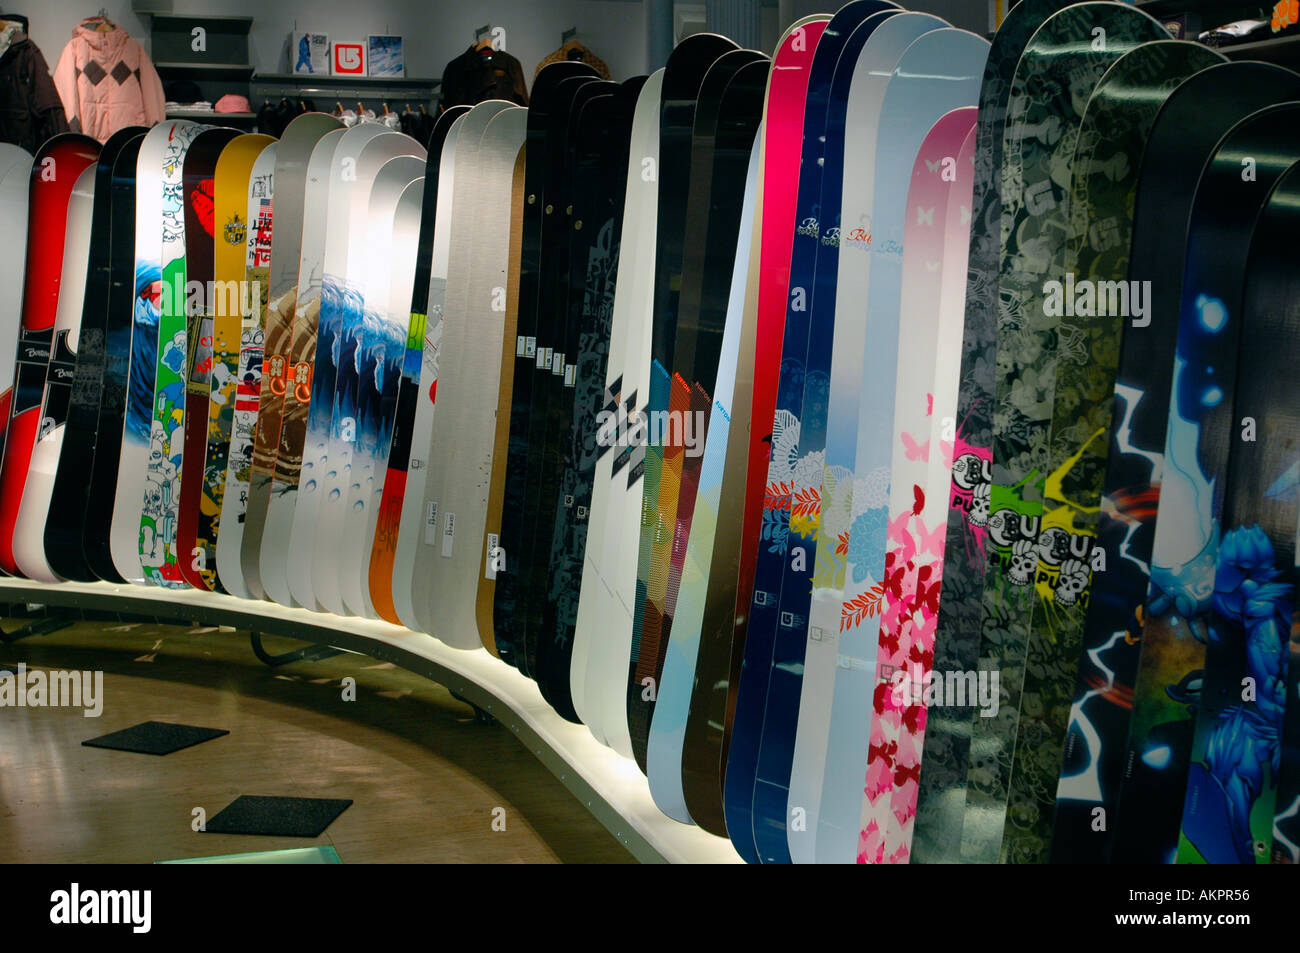 The Burton store in Soho in New York City selling snowboards and snowboard  related recreational merchandise Stock Photo - Alamy